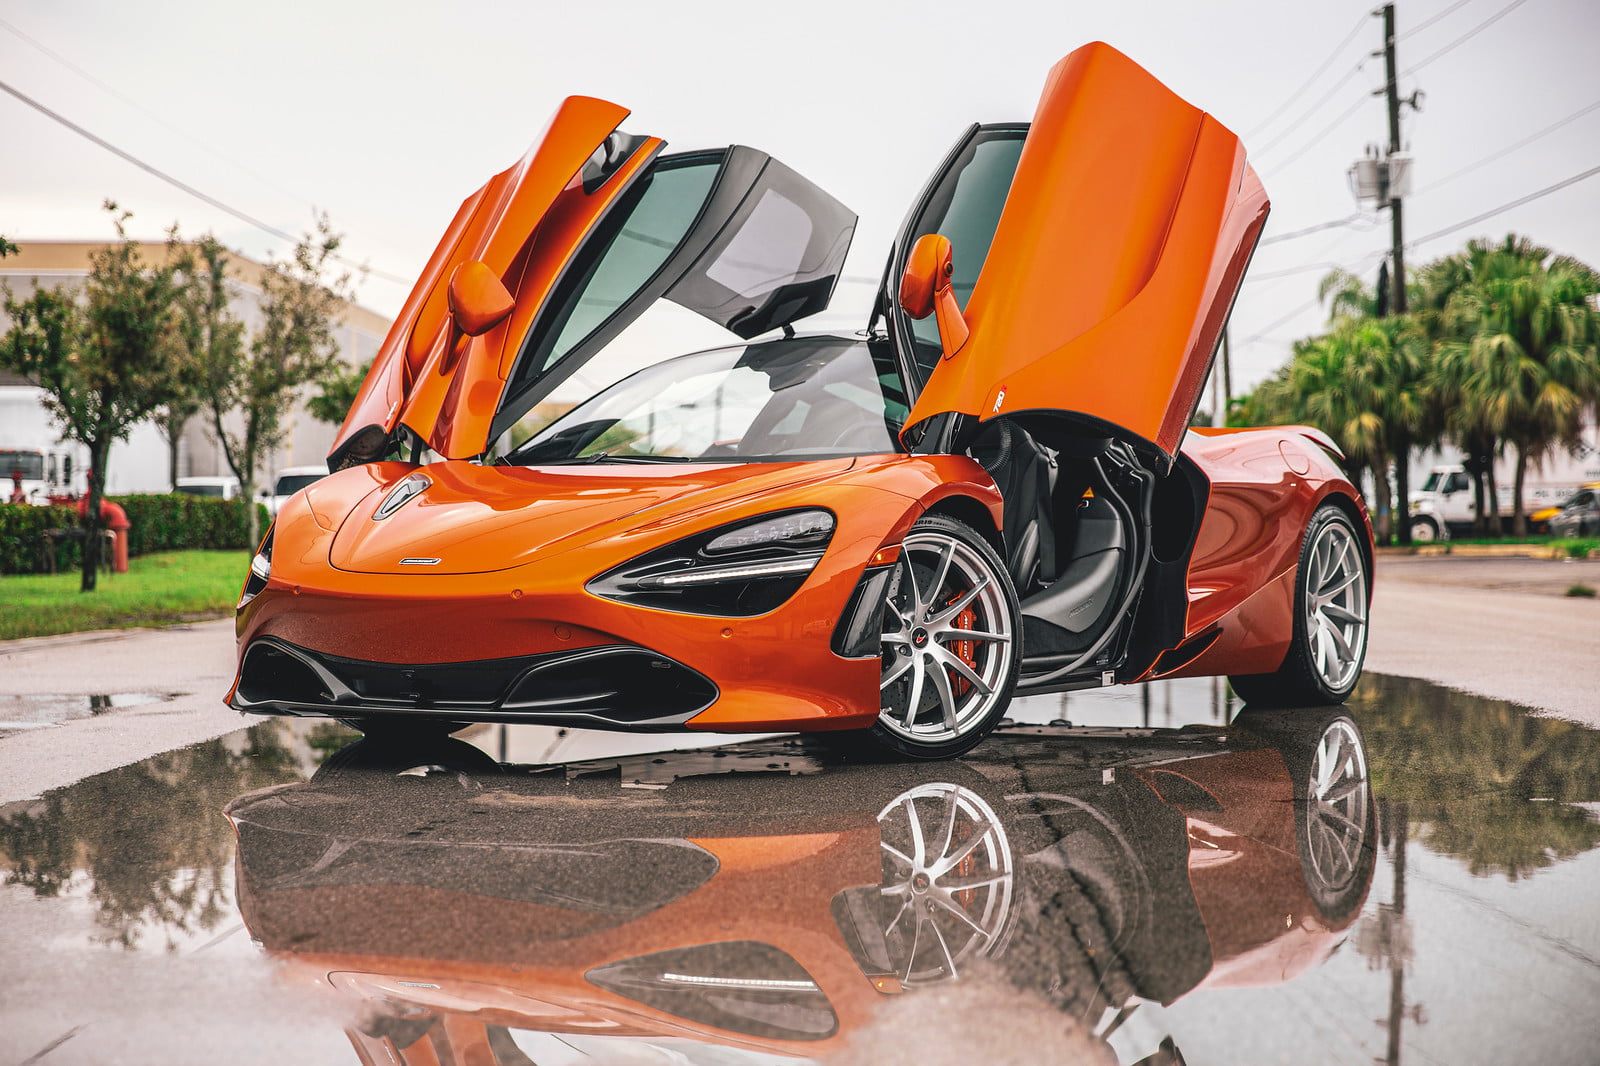 Mclaren 720s Race Car Rental in Miami Florida Luxx Miami Best Mclaren 720s Race Car Rental in Miami Luxx Miami offers exotic cars for rents per day Call us today to reserve your rental car in Miami Racing Luxx Miami miami rental car exotic